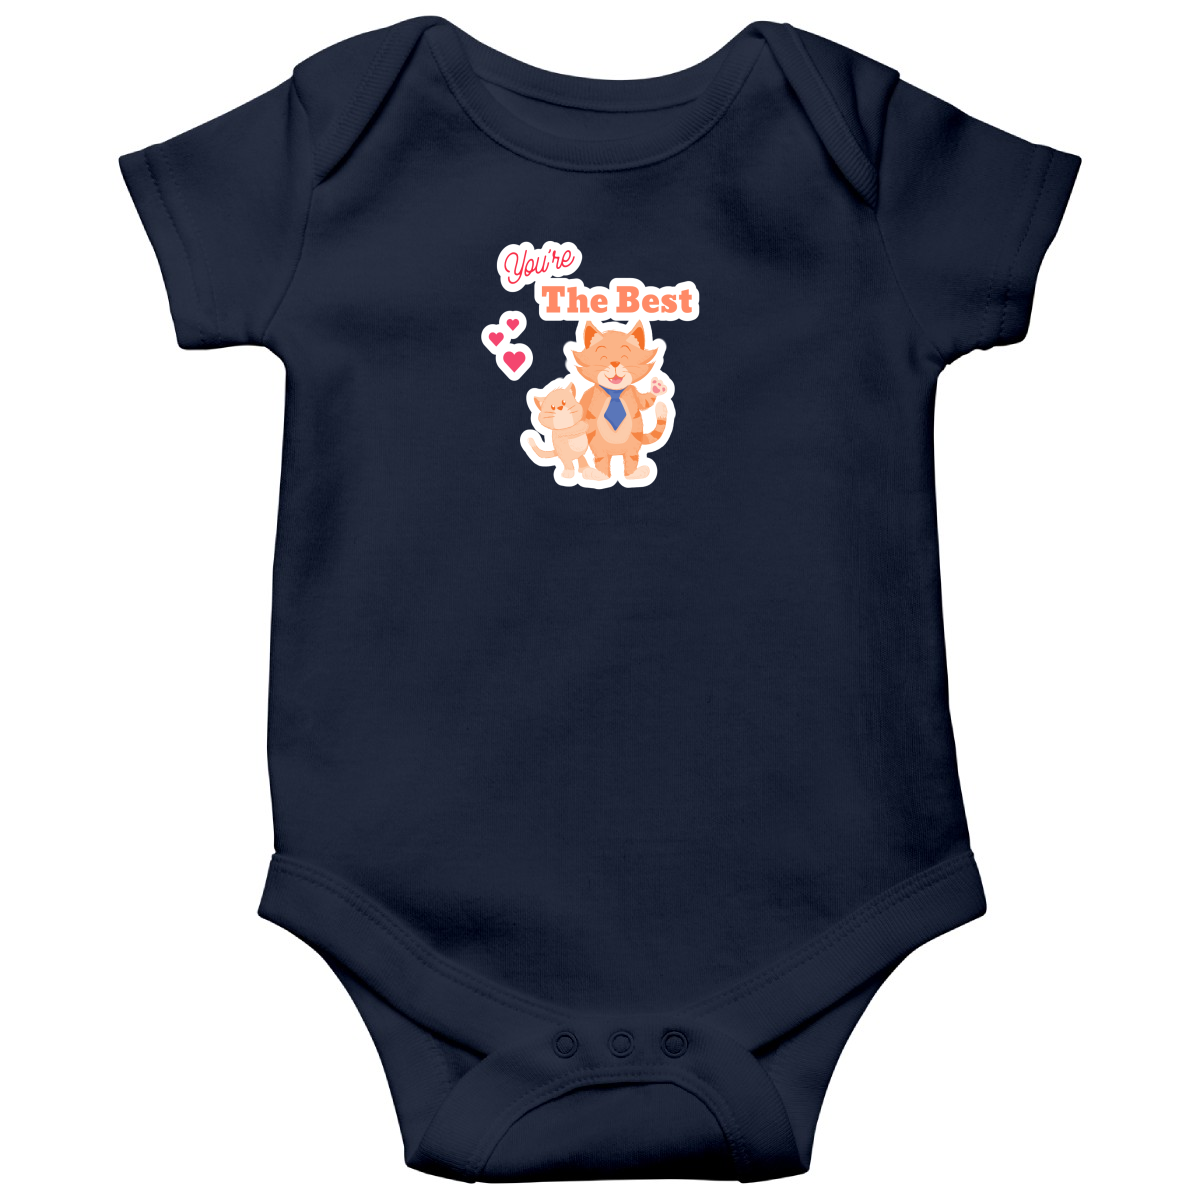 You are the Best Baby Bodysuits | Navy